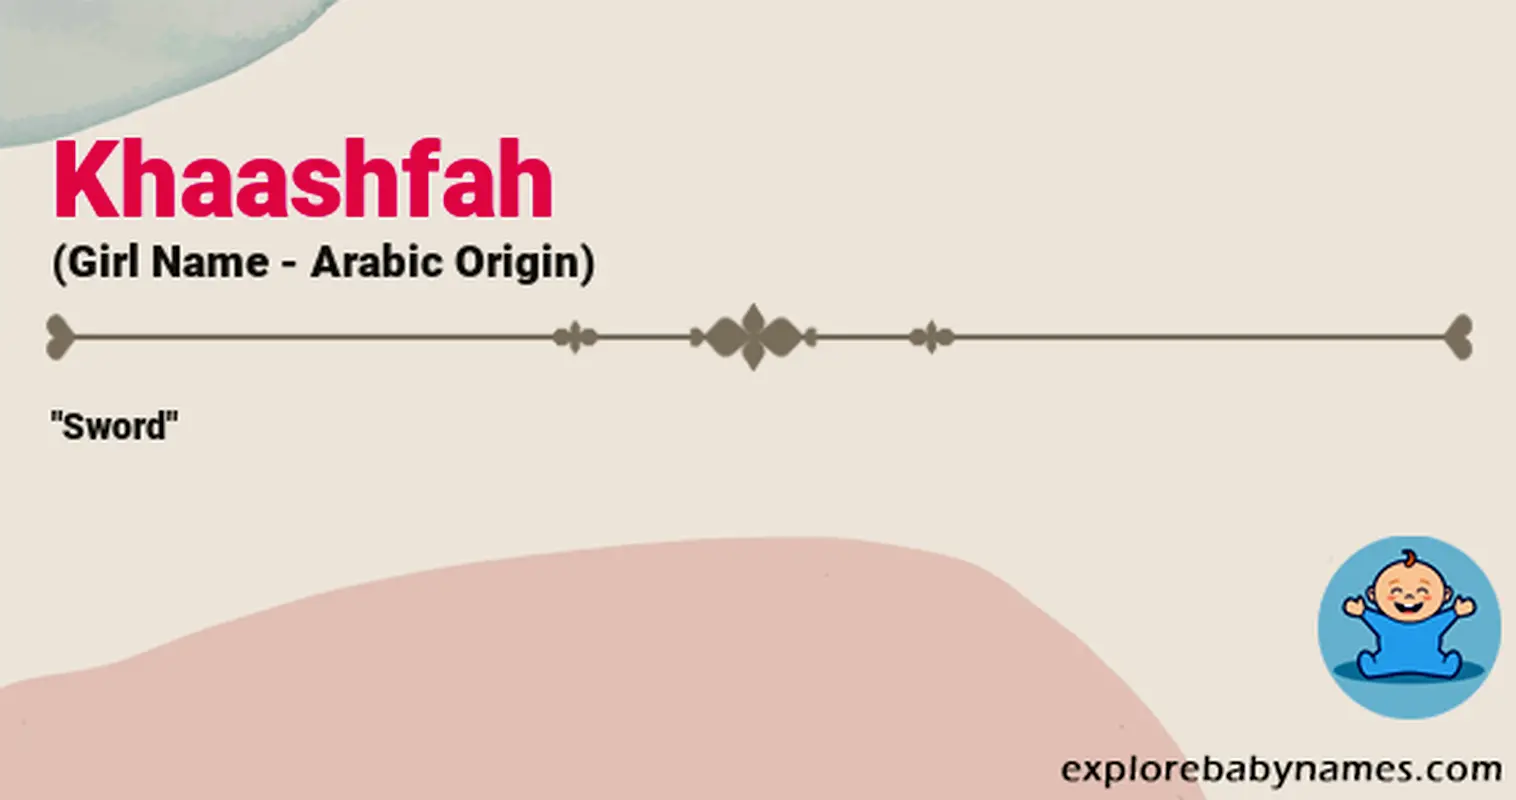 Meaning of Khaashfah